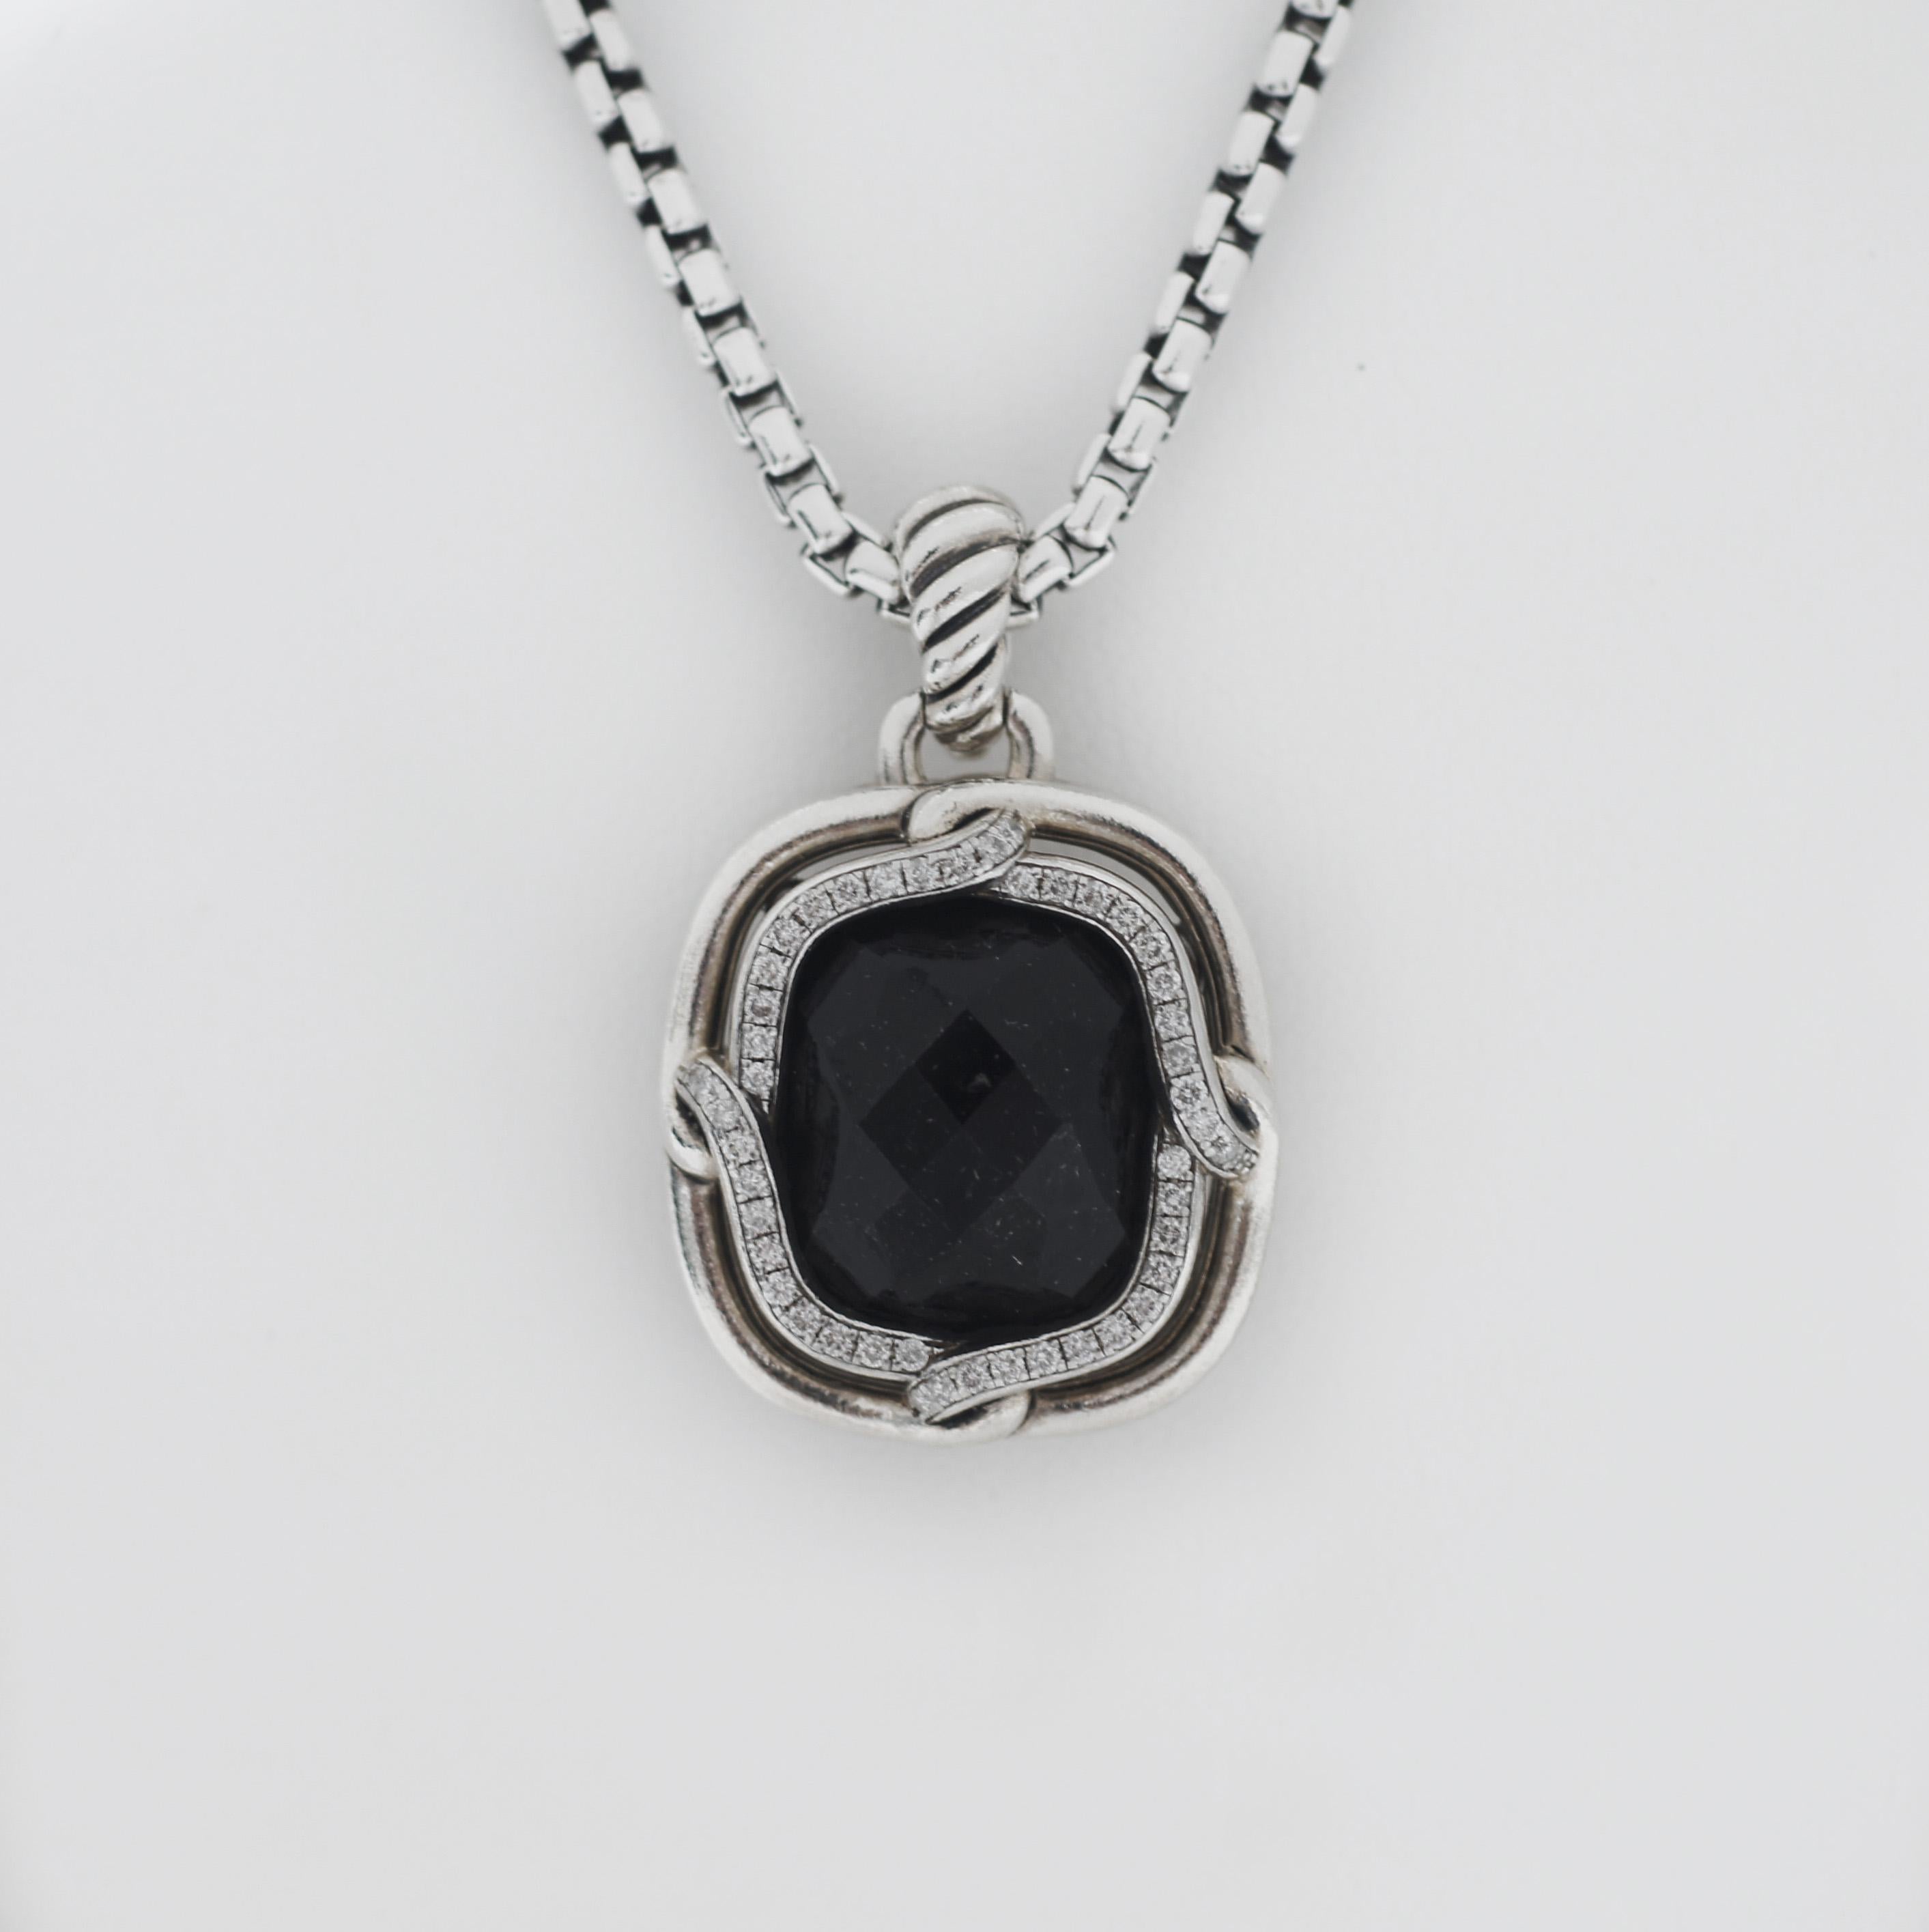 David Yurman
Labyrinth Collection
Material: 925 sterling silver
Main Stone: Onyx
Diamonds: 48 round brilliant cuts Approx. 0.72 carat total weight surrounding Onyx
Pendant measures 1 1/4 inches long and 1 inches wide
Chain measures 18 inches